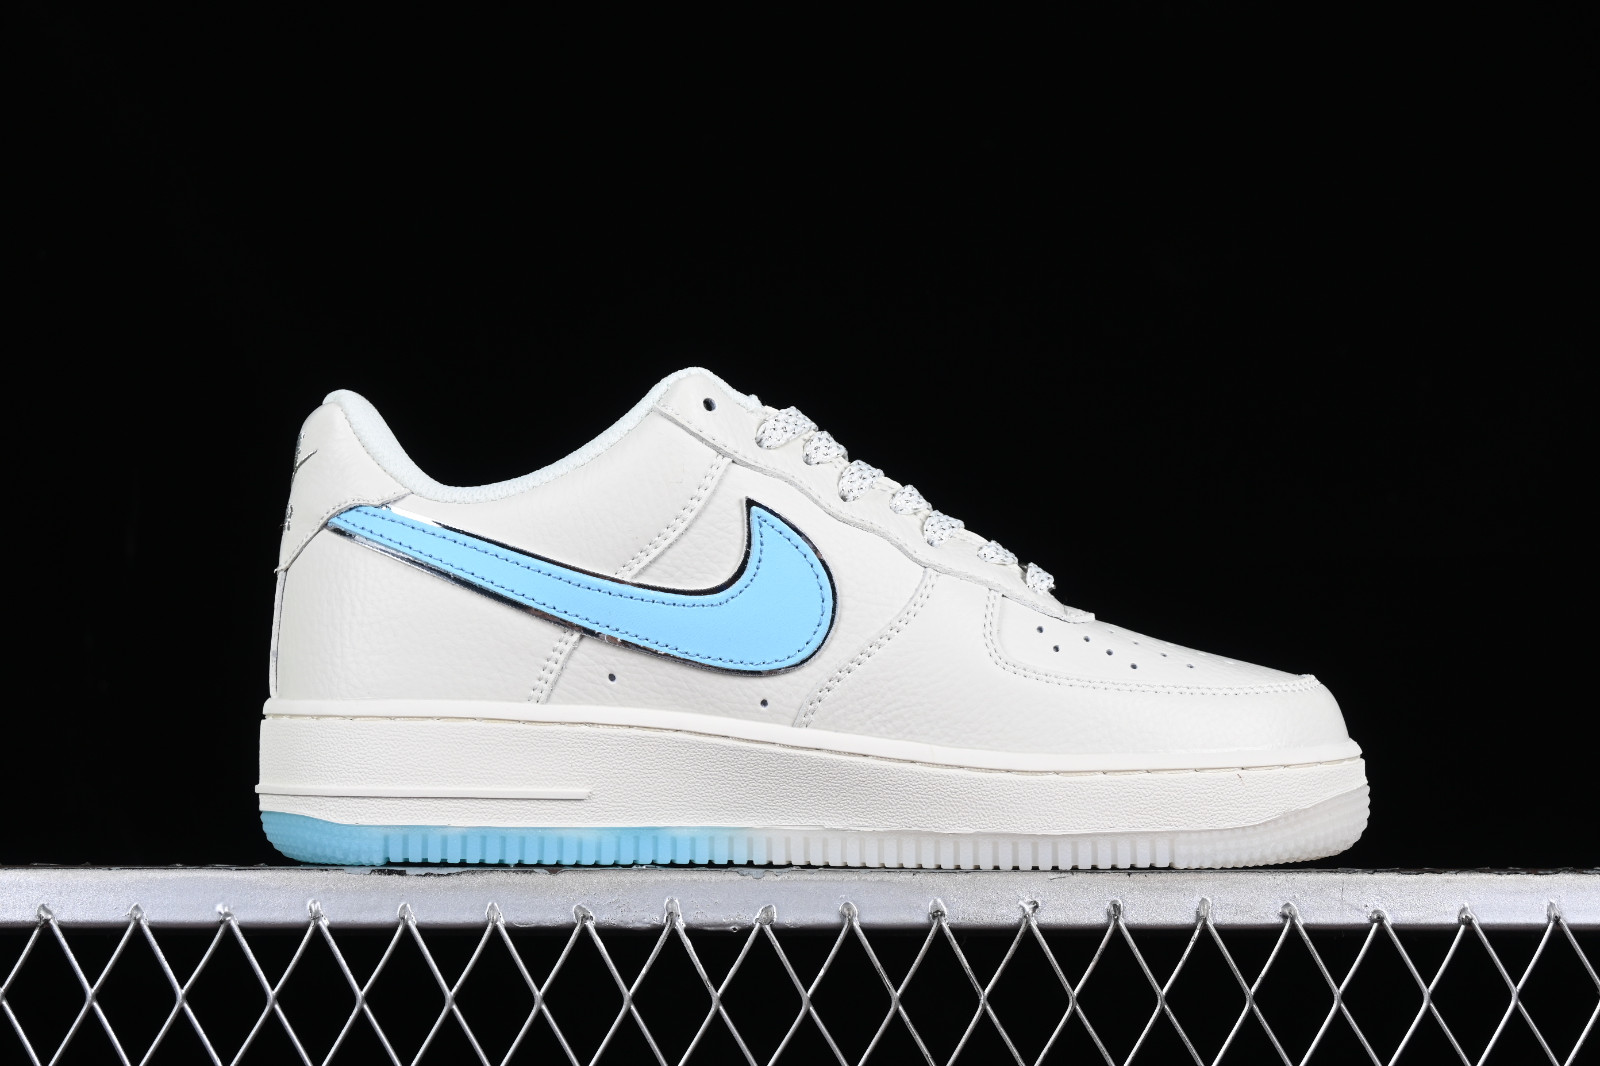 Air Force 1 LV8 GS Outline